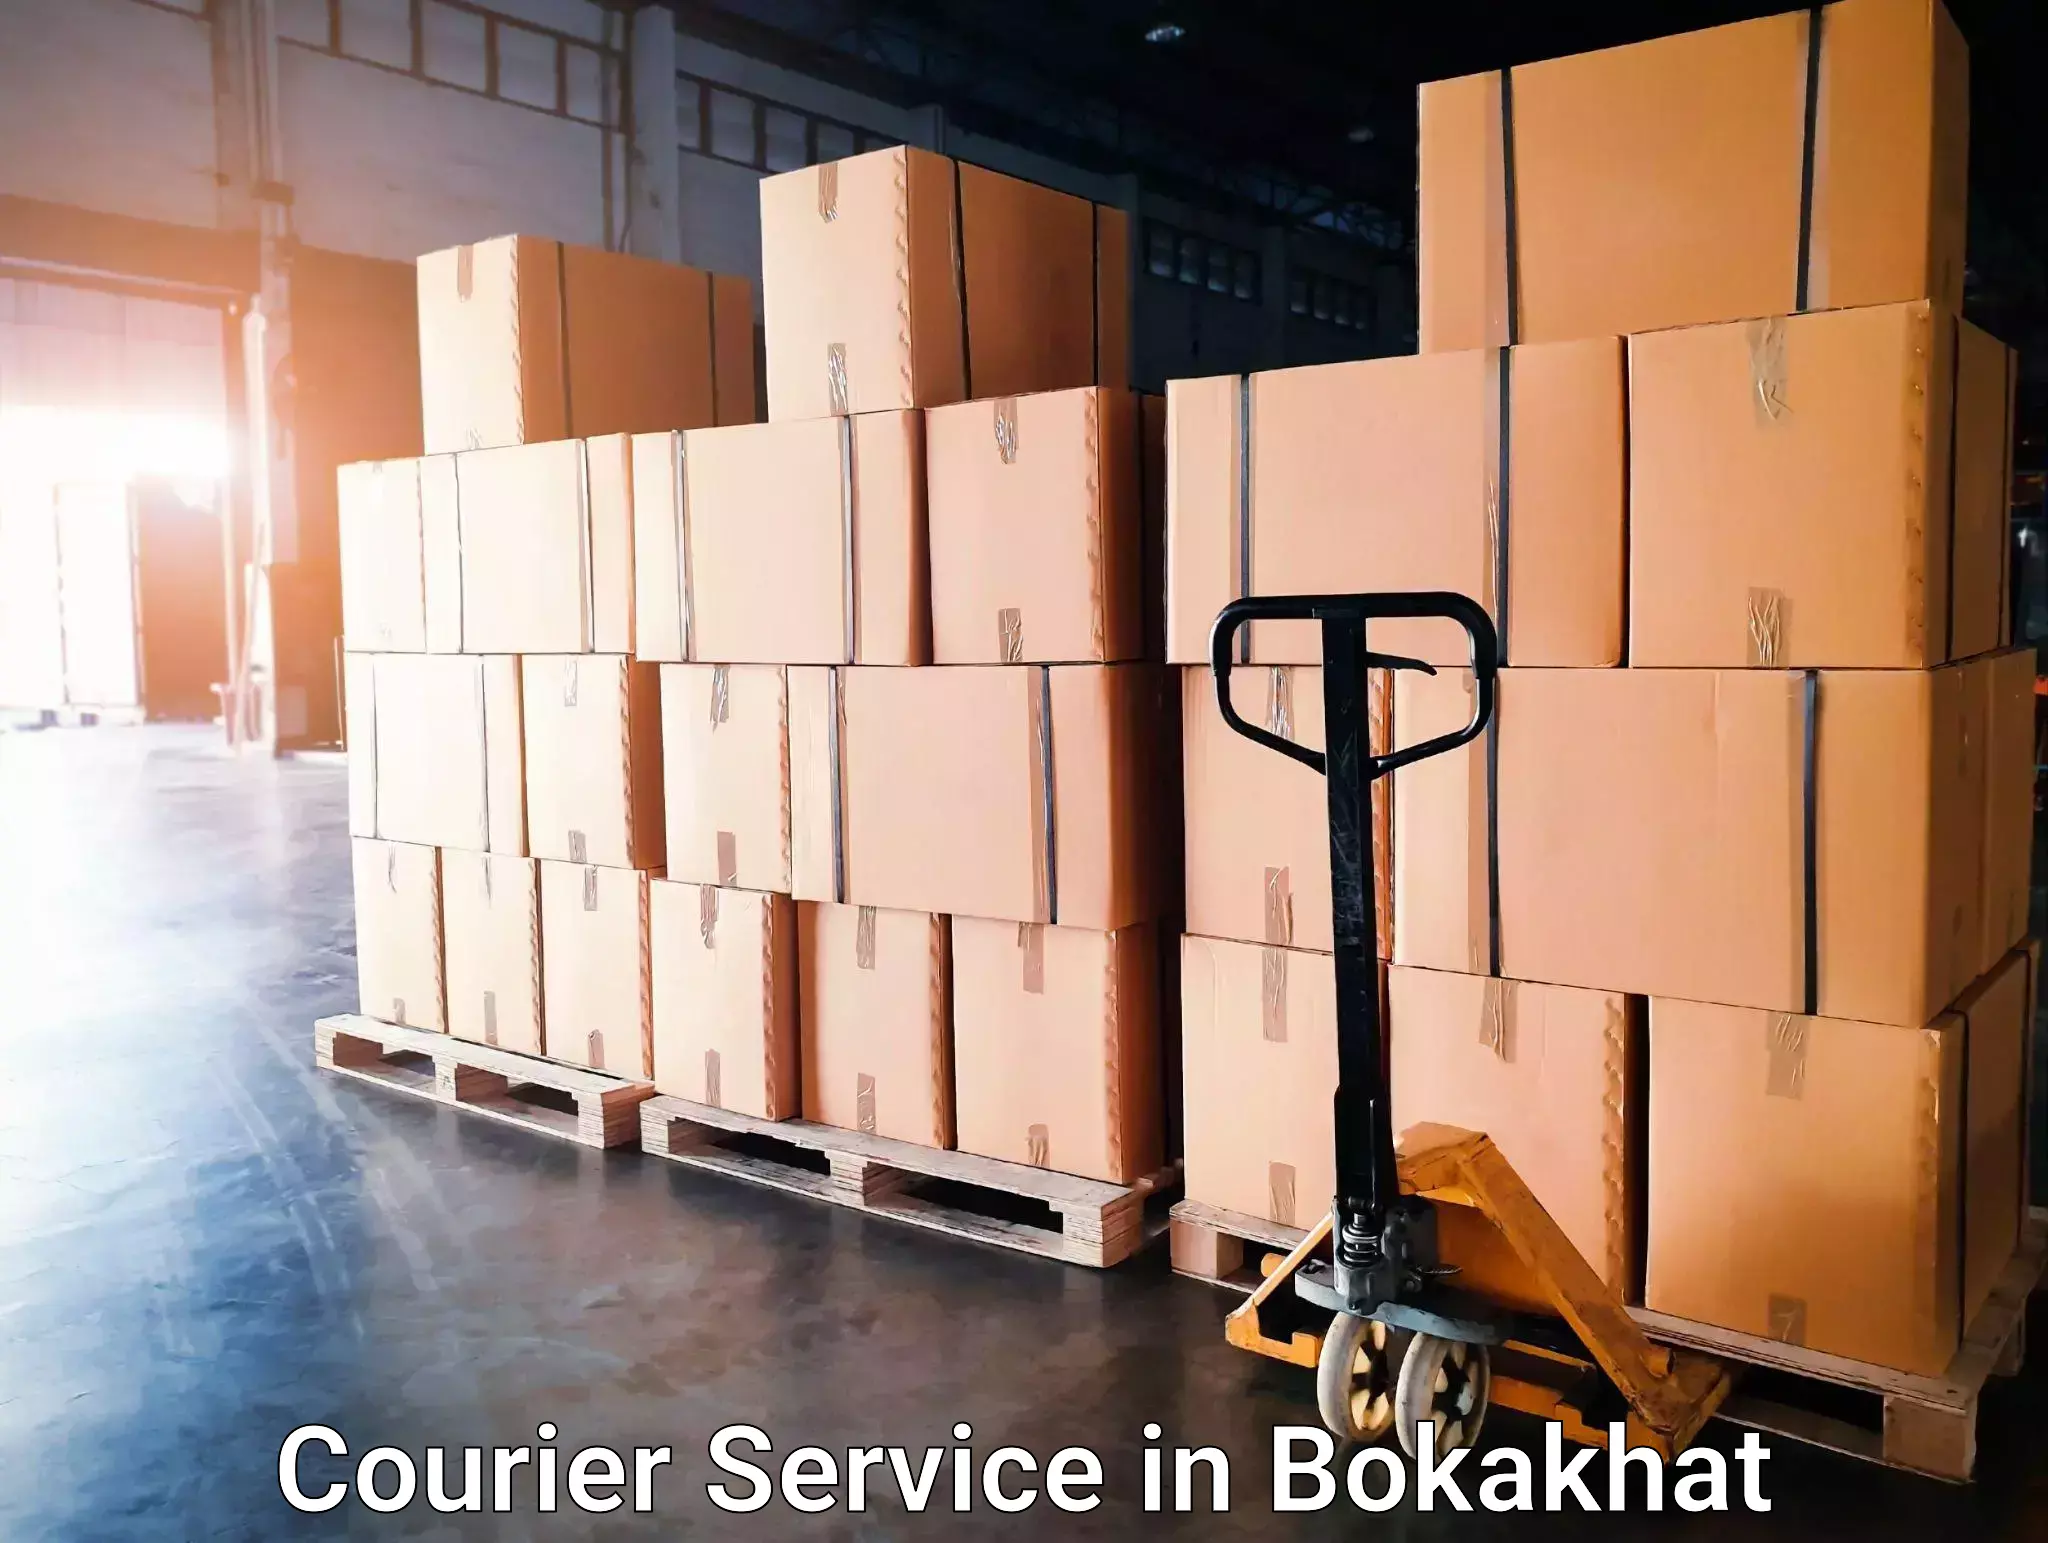 Small business couriers in Bokakhat